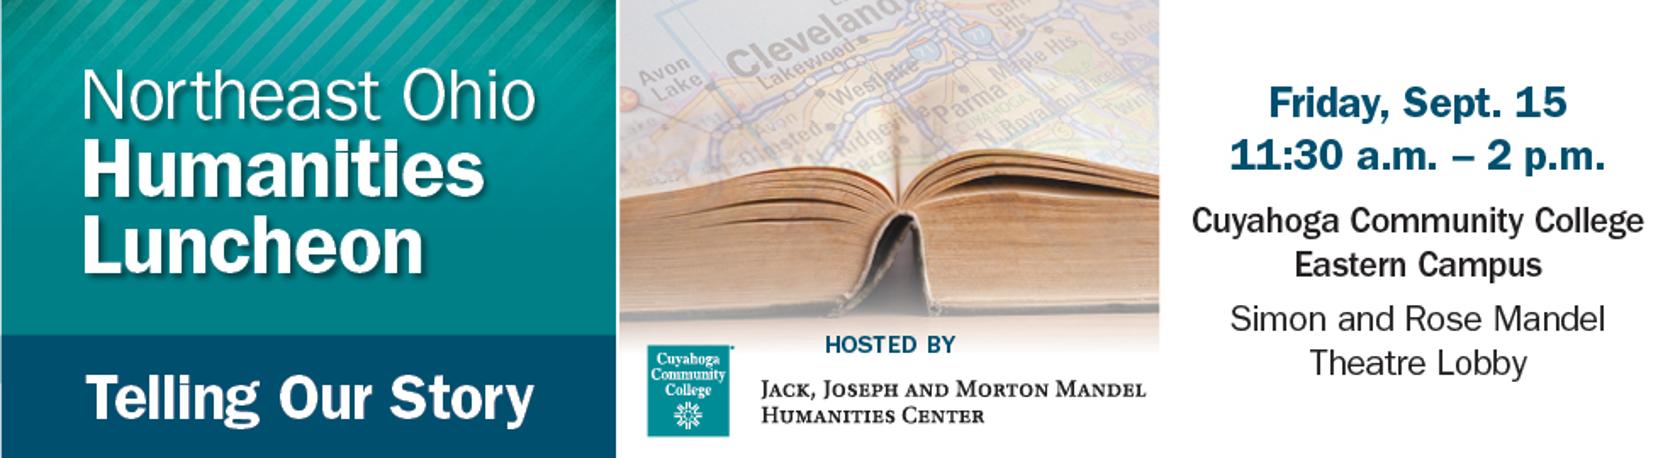 Northeast Ohio Humanities Luncheon: Telling Our Story, Friday, Sept. 15, 11:30 - 2 p.m., Simon and Rose Mandel Theatre Lobby